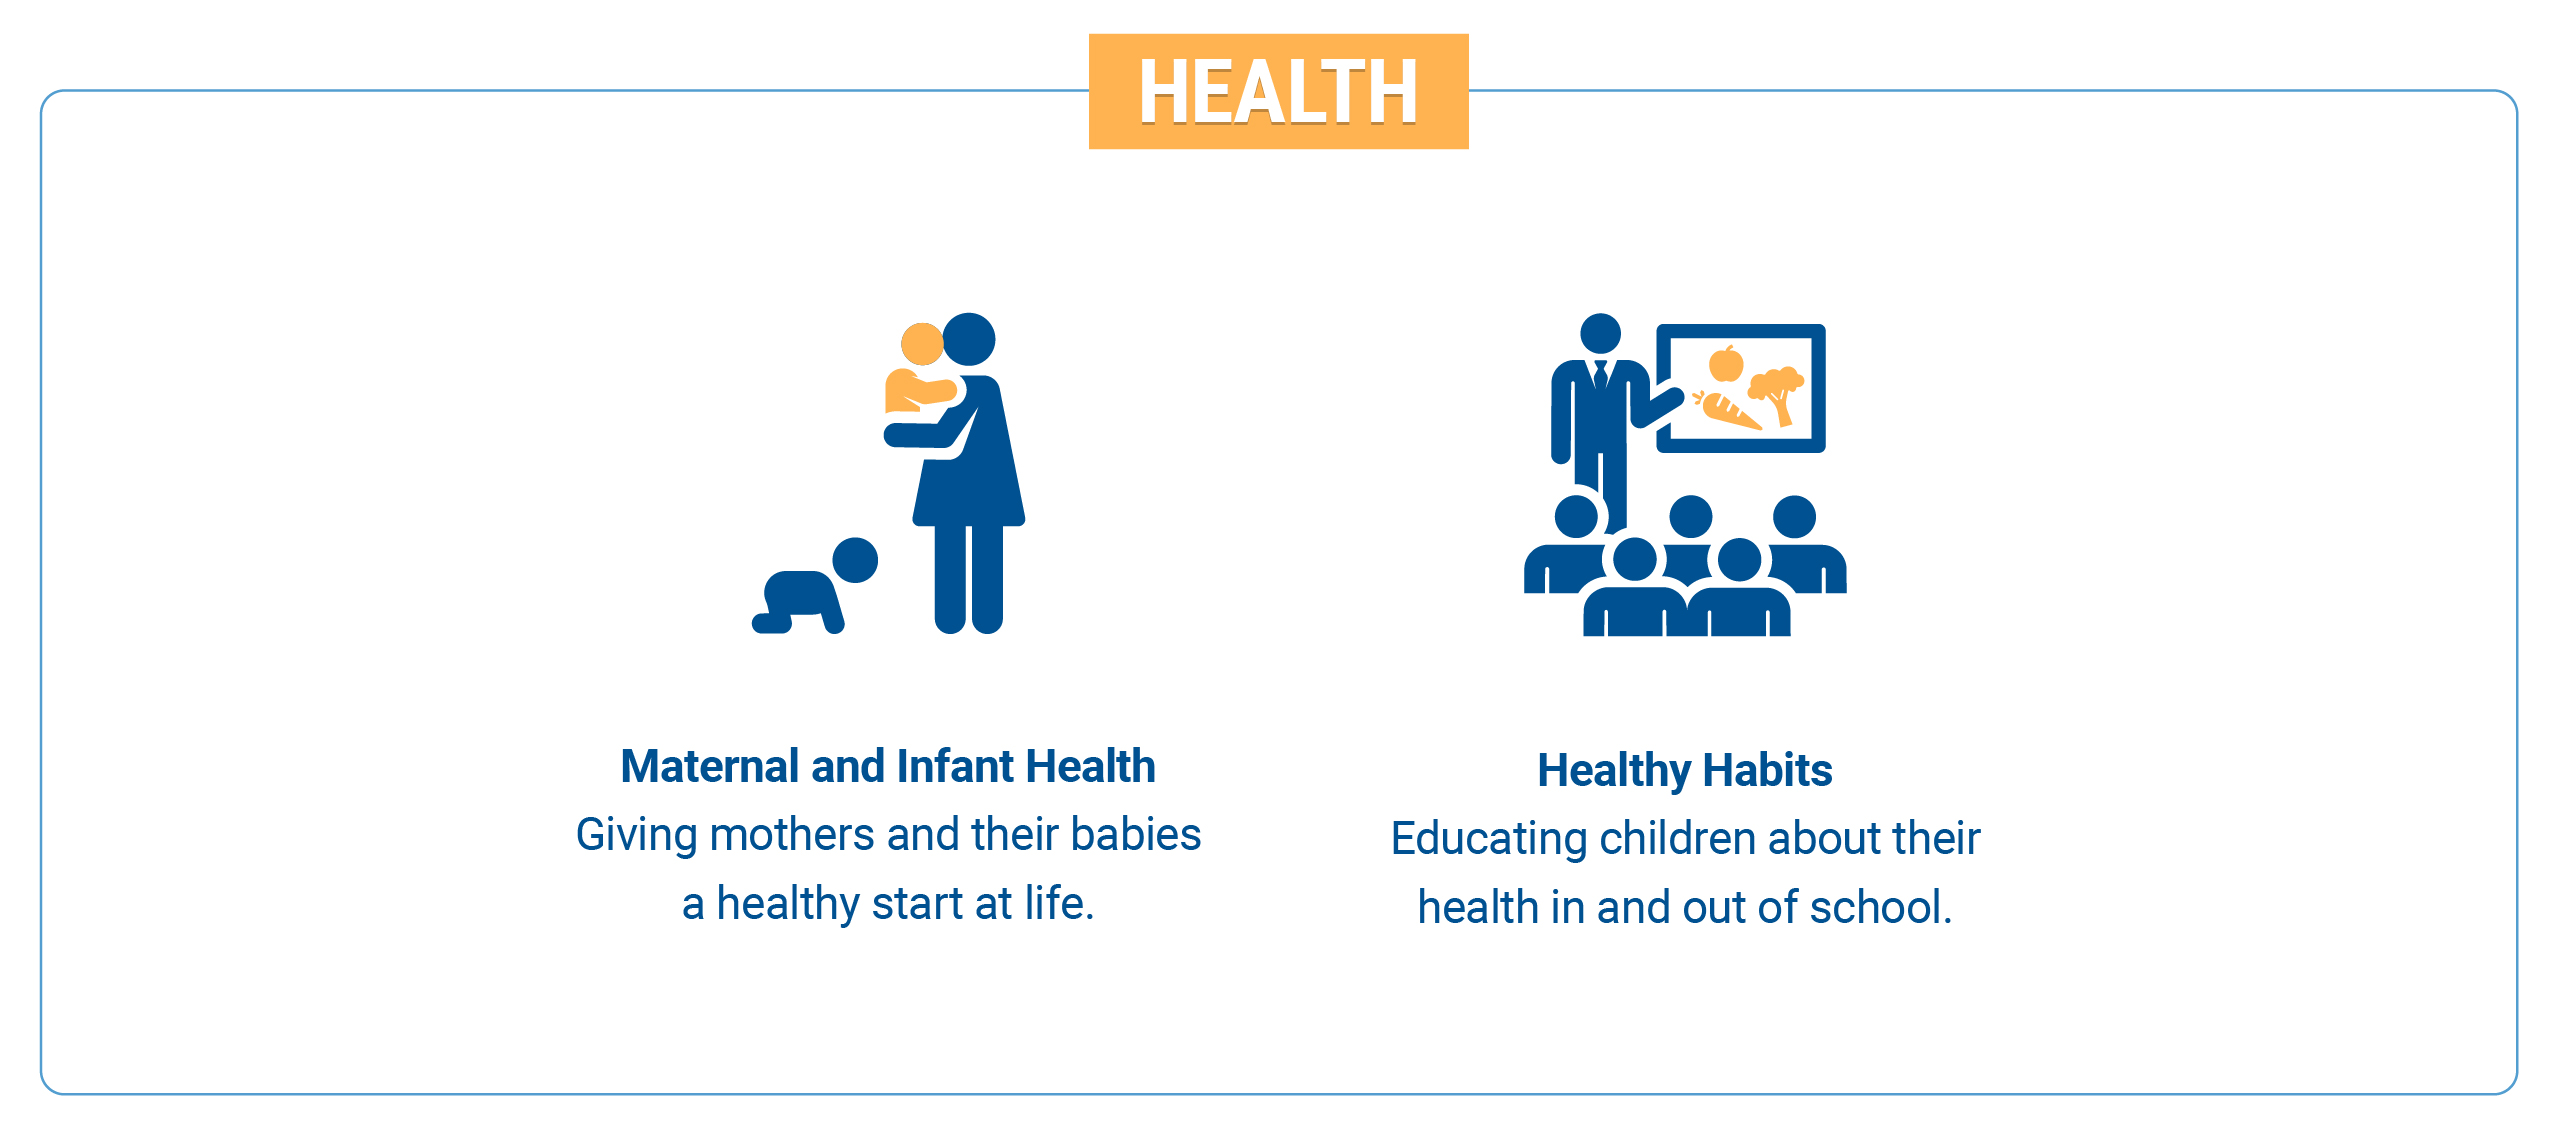 Health: Maternal and Infant Health, giving mothers and their babies a healthy start a life.